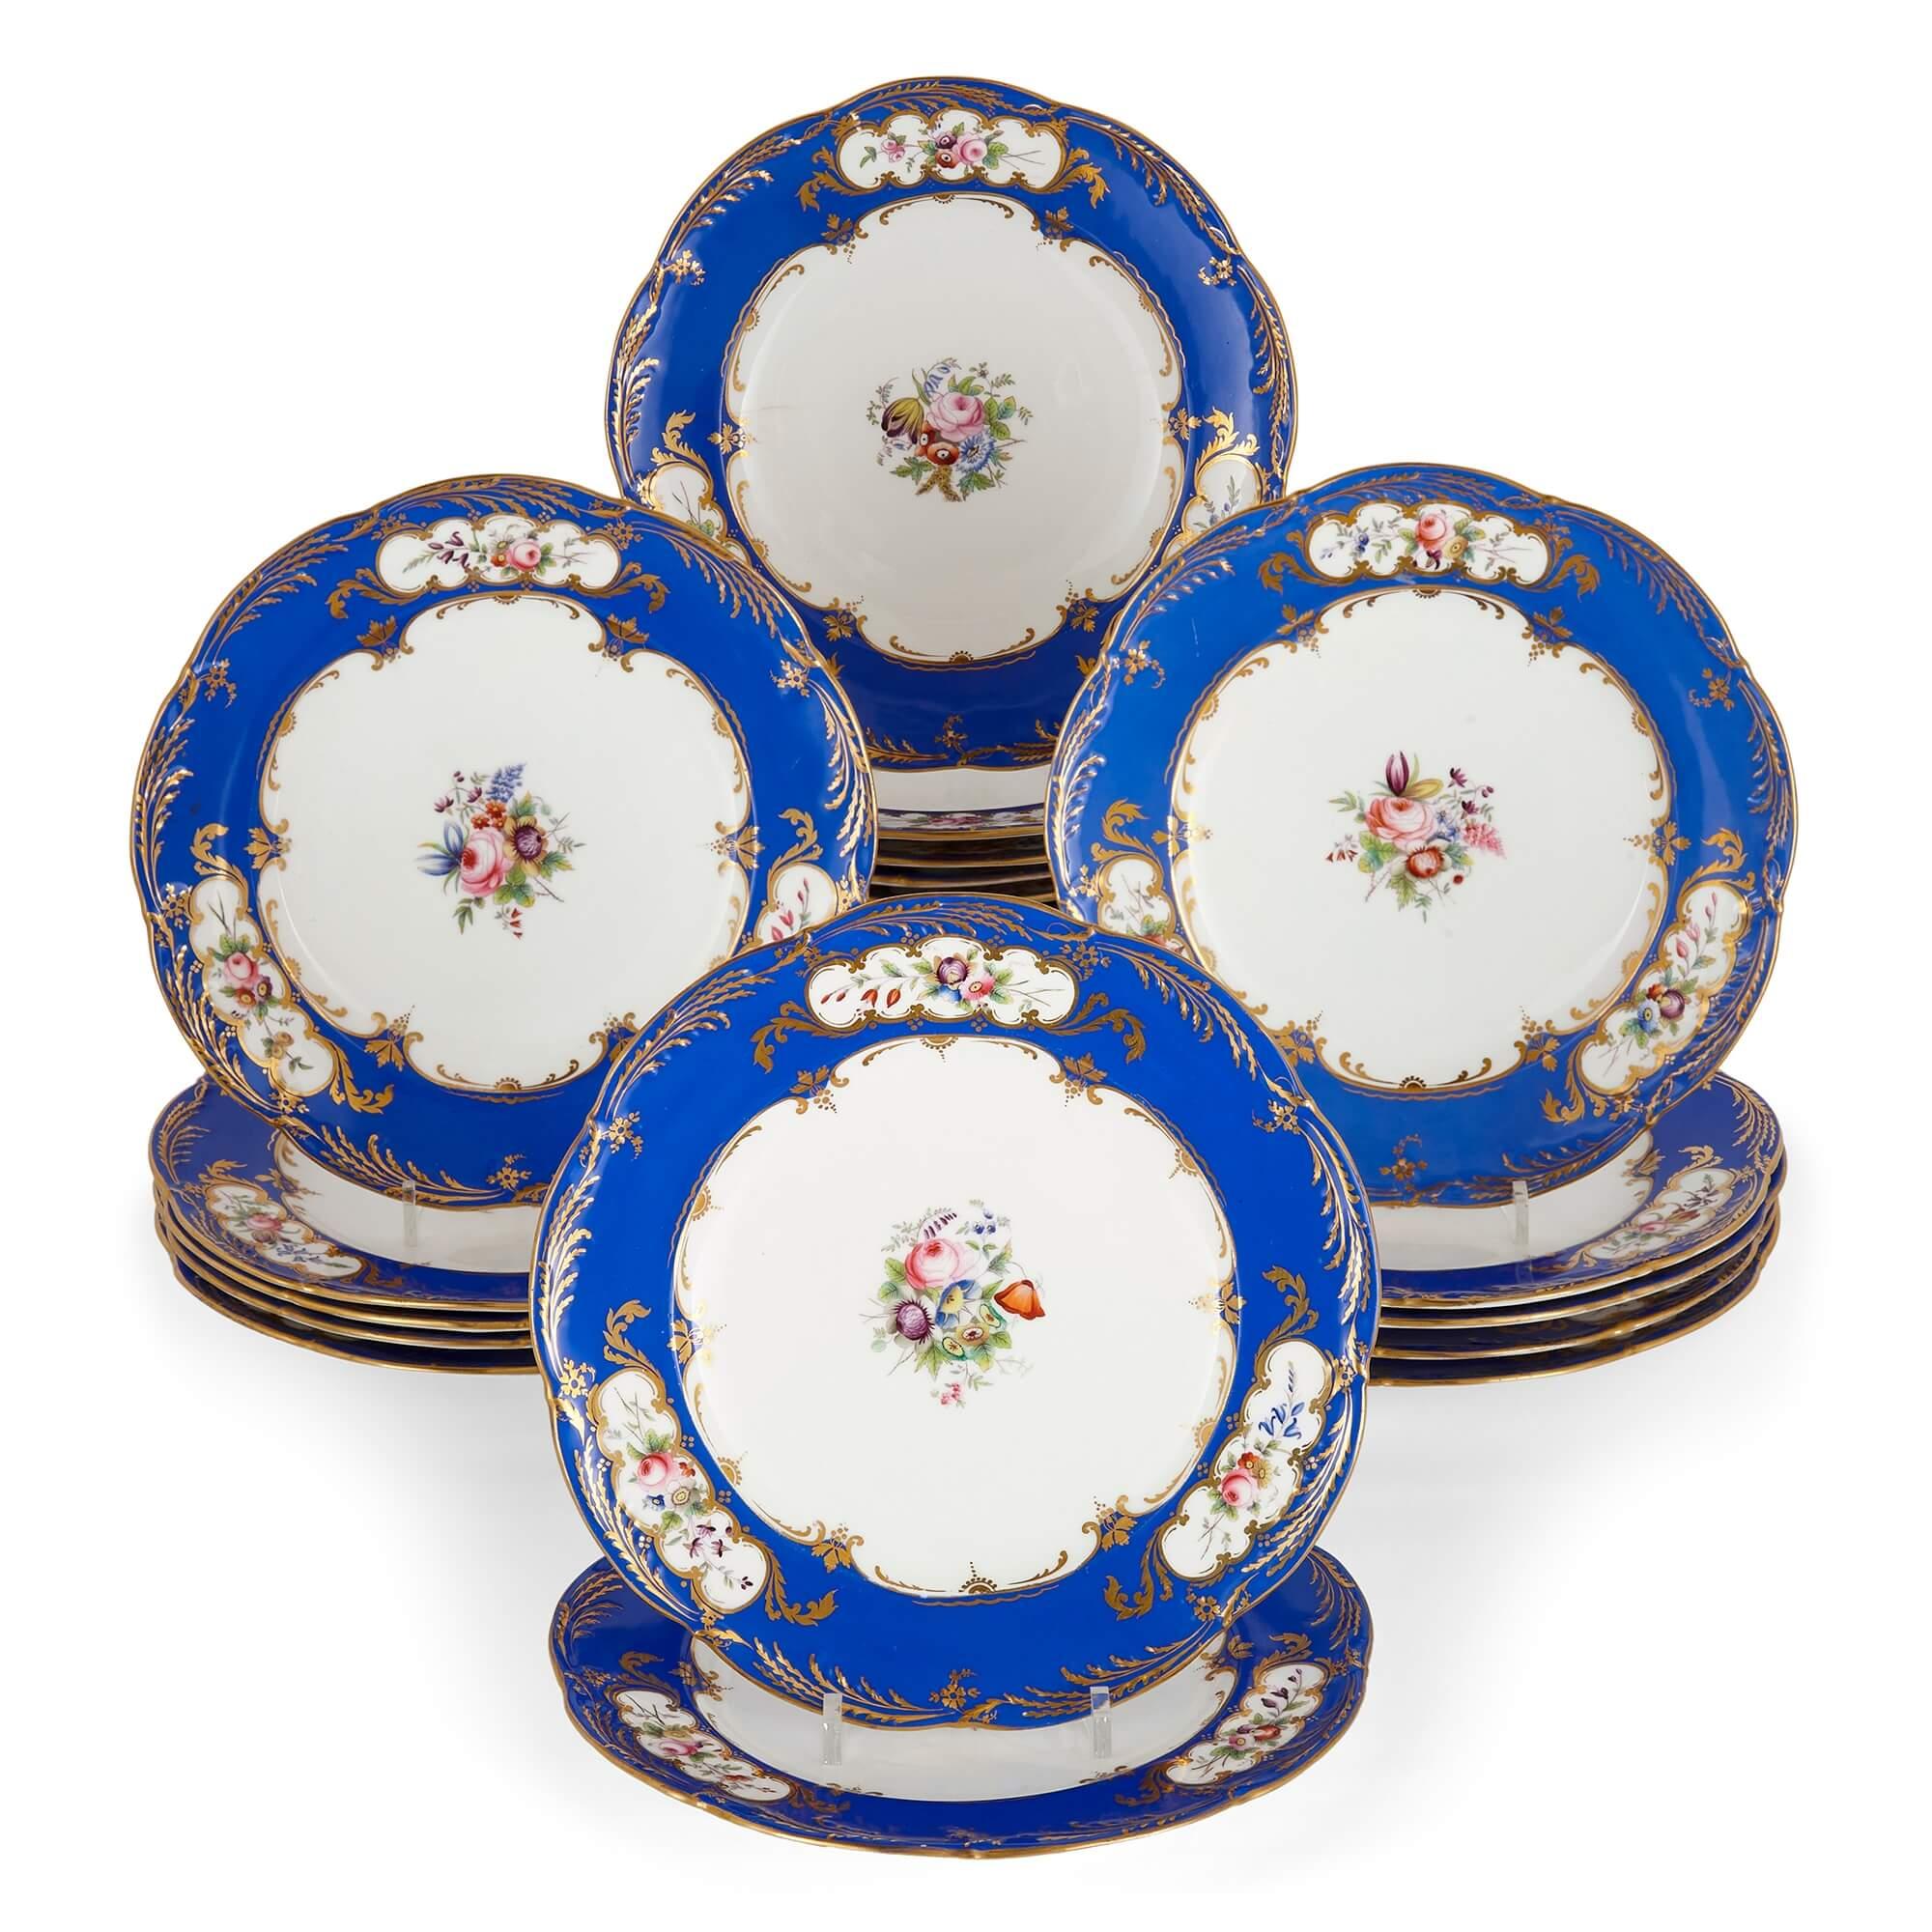 Set of twenty four blue and white floral porcelain dinner plates
Continental, 19th Century
Height 2.5cm, diameter 23.5cm

These blue and white porcelain dinner plates will make an excellent set, perfect for entertaining. They have been expertly made